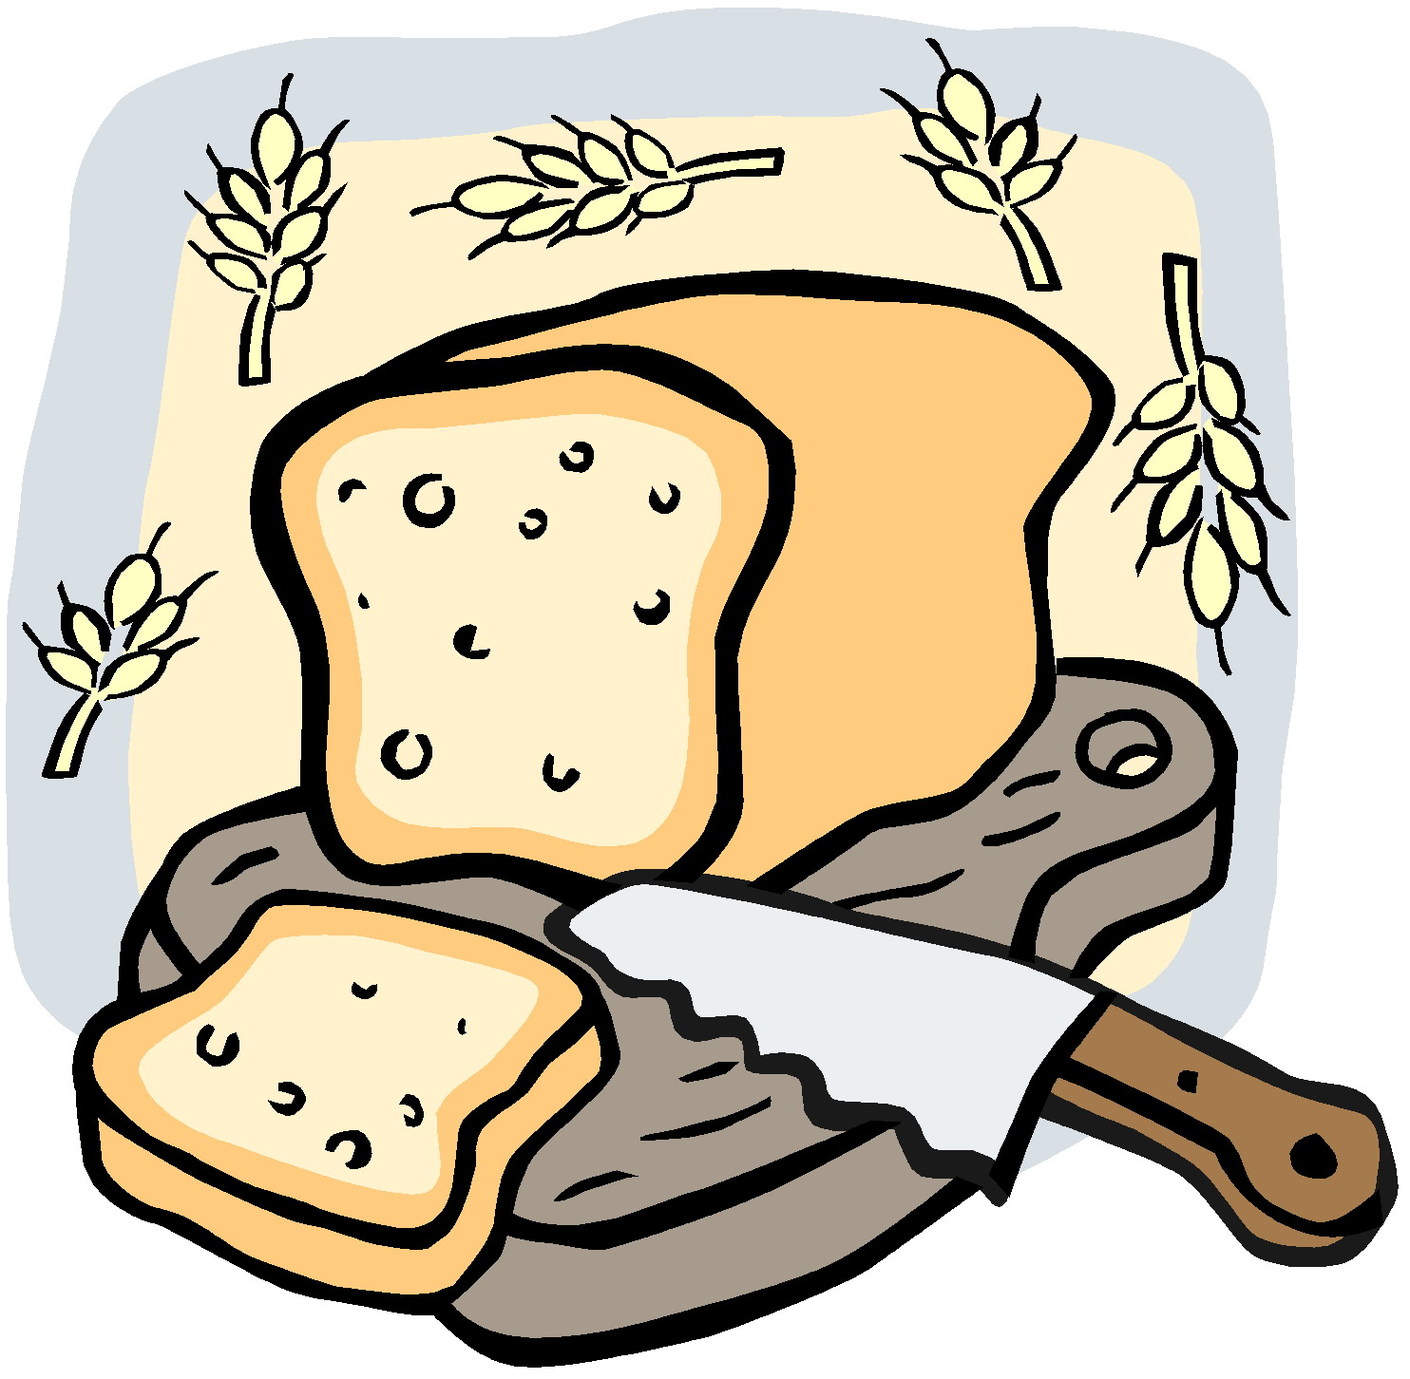 Loaf Of Bread Cartoon Clipart - Free to use Clip Art Resource